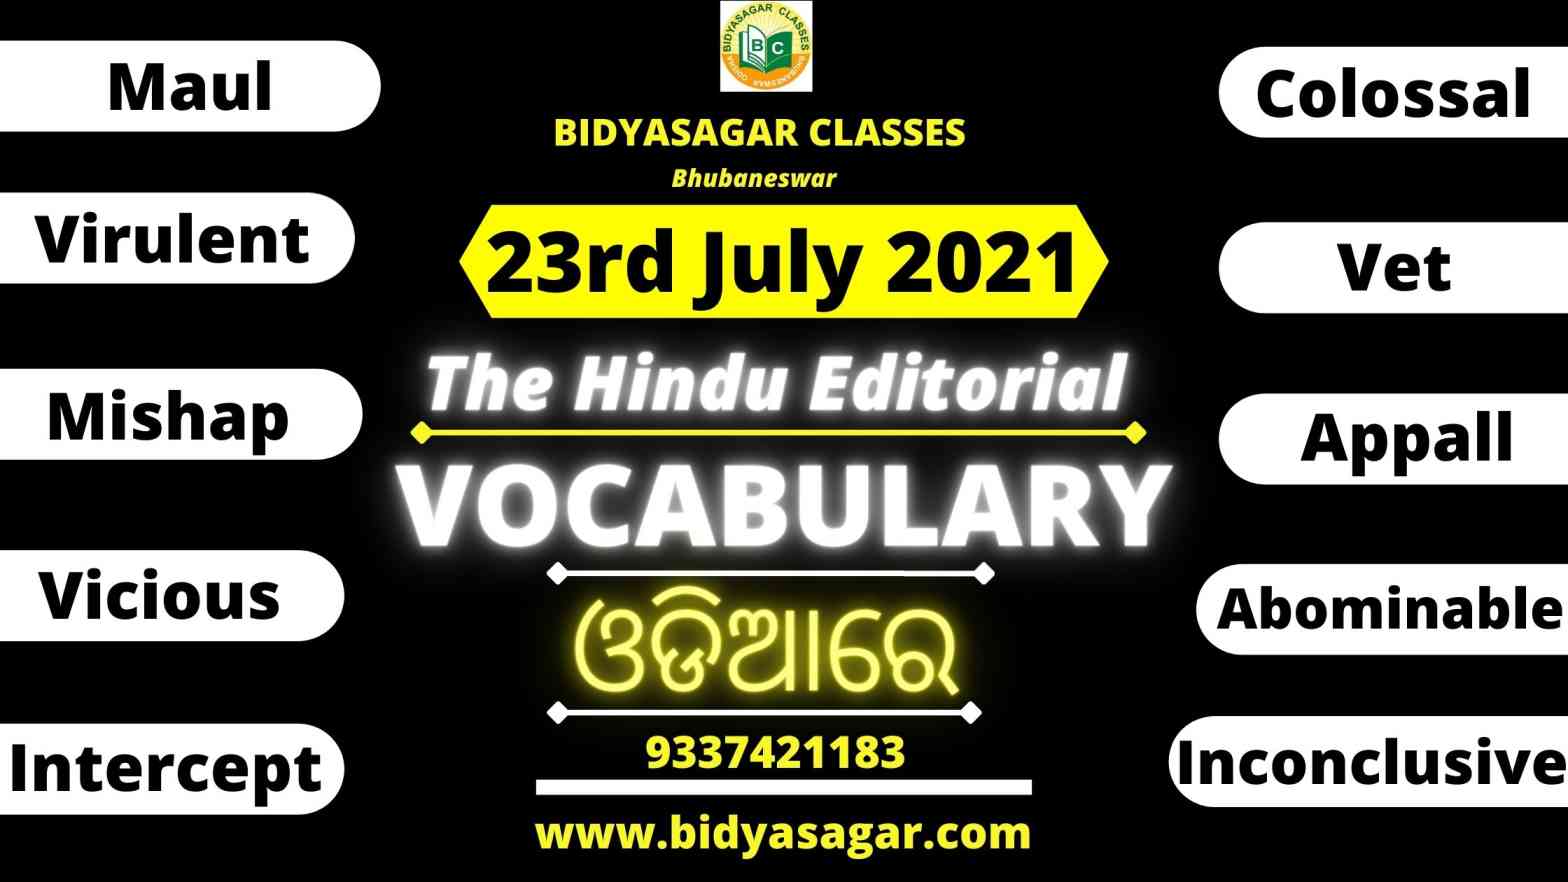 The Hindu Editorial Vocabulary of 23rd July 2021